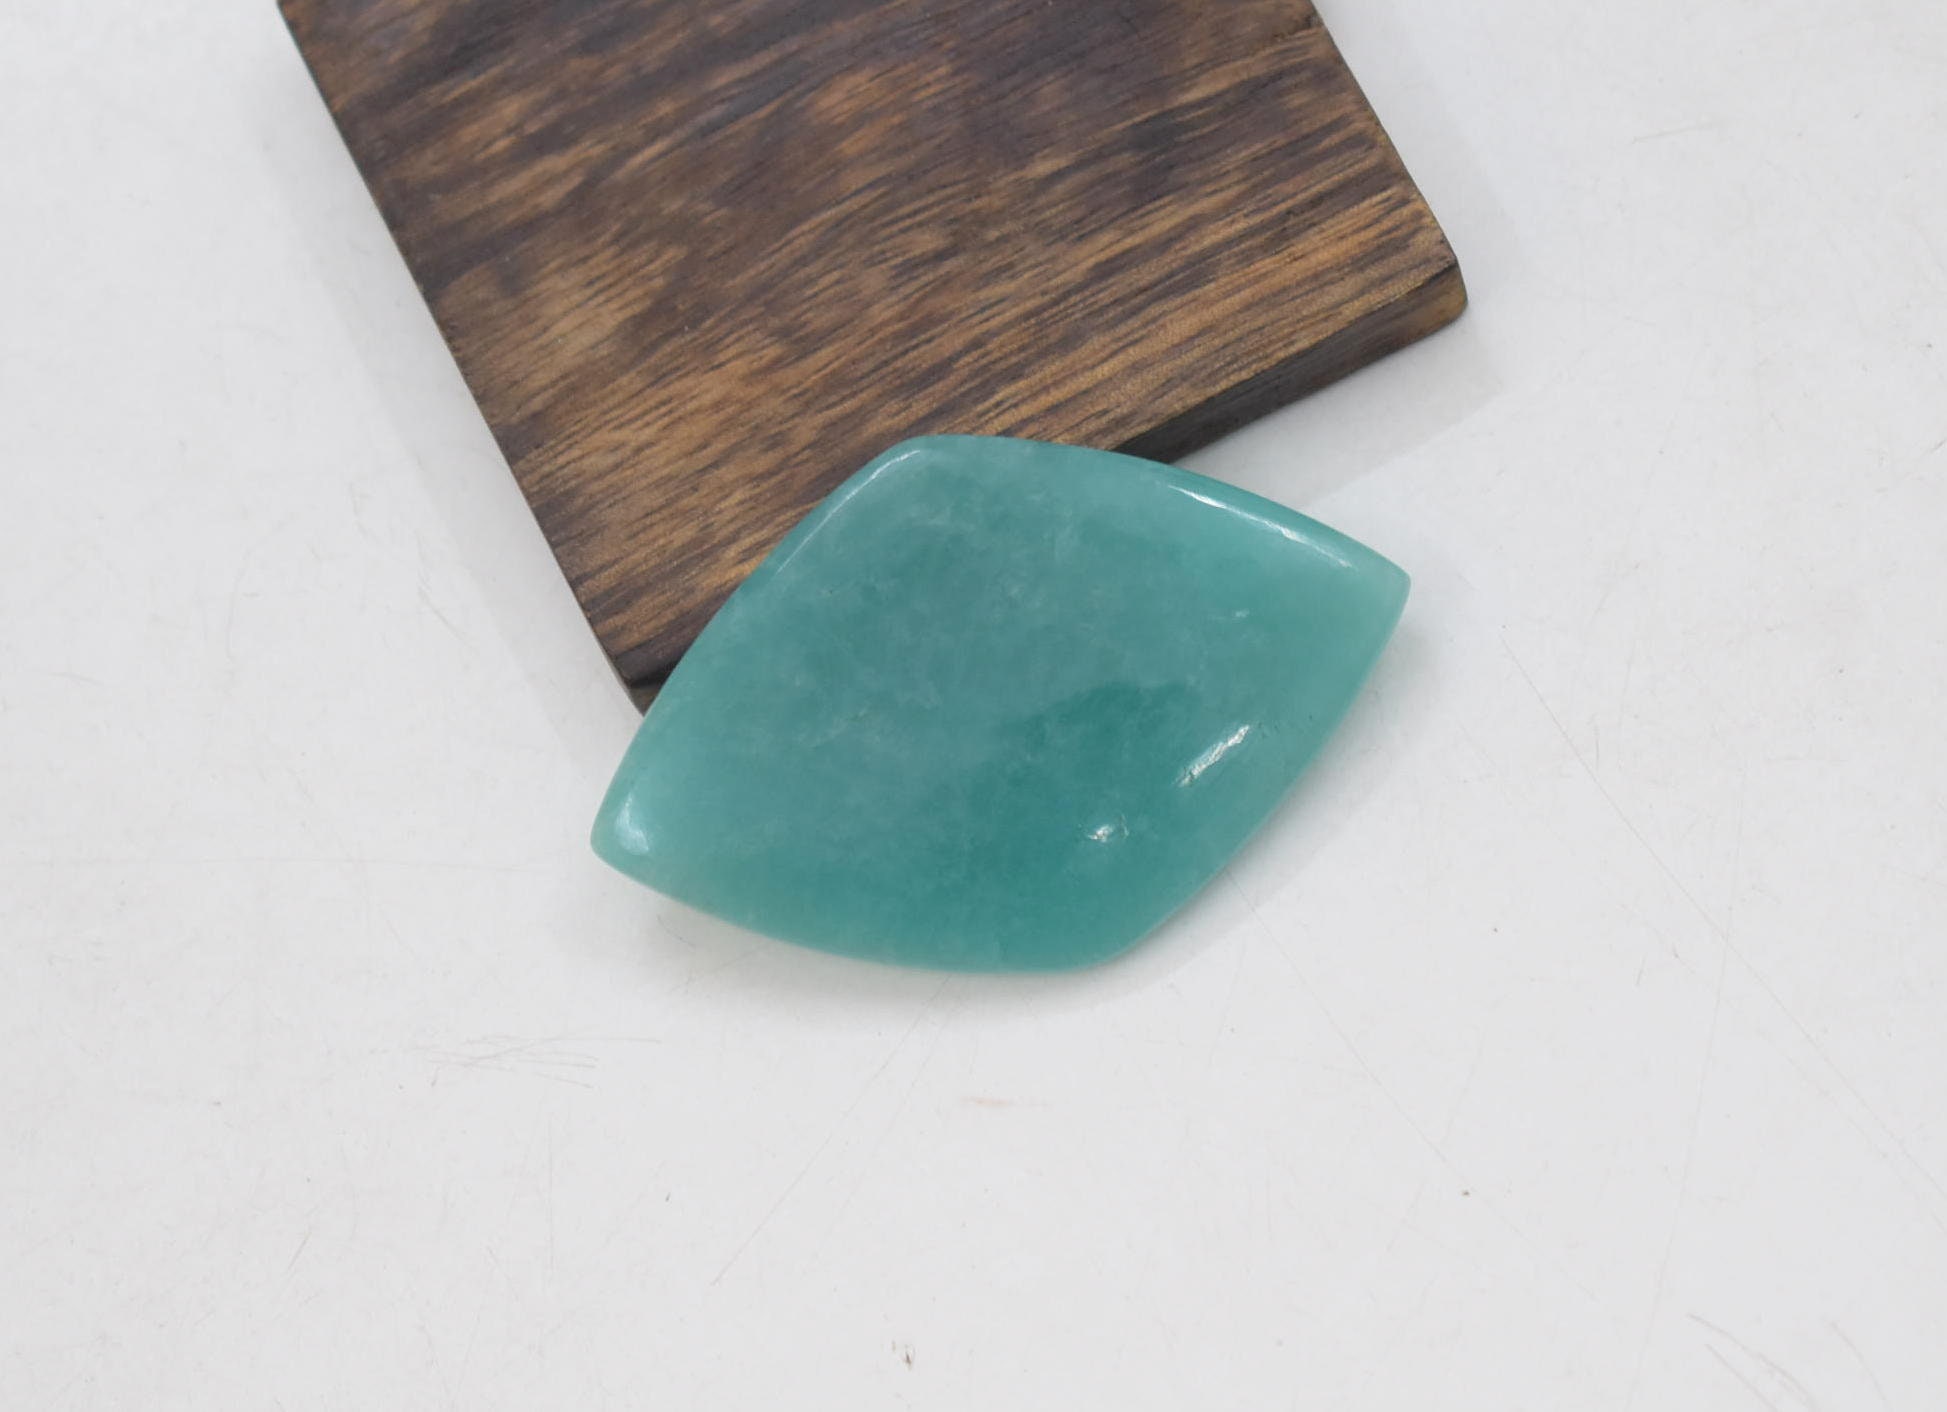 100% Natural African Amazonite Cabochon,Green Amazonite,Handmade Plain Cabochon,Handmade Faceted Cabochon,Natural Color Amazonite | Save 33% - Rajasthan Living 14